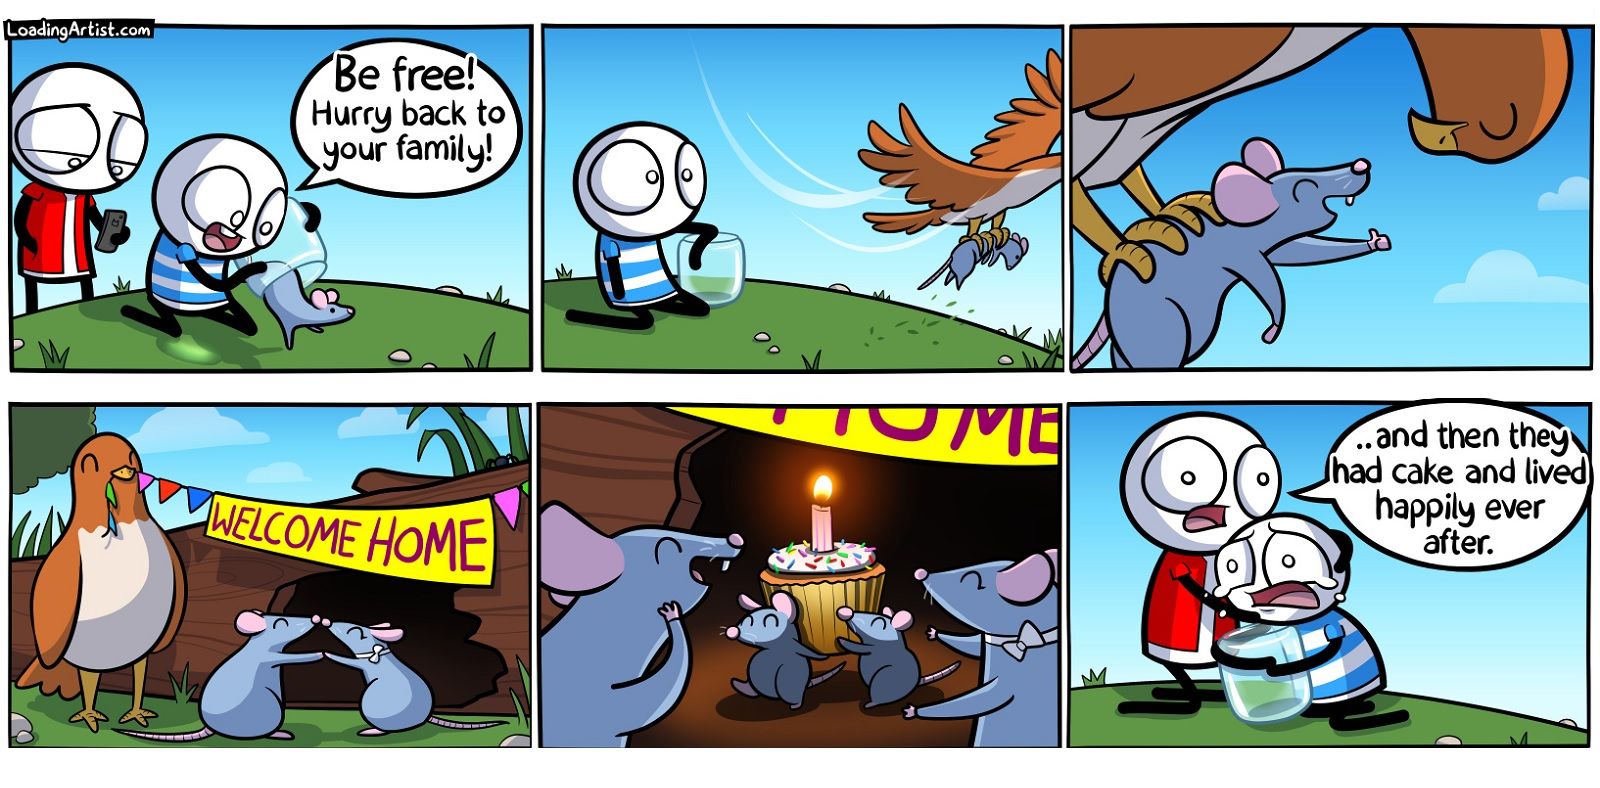 Best web comics around All the funnies you need to get through the week image 2